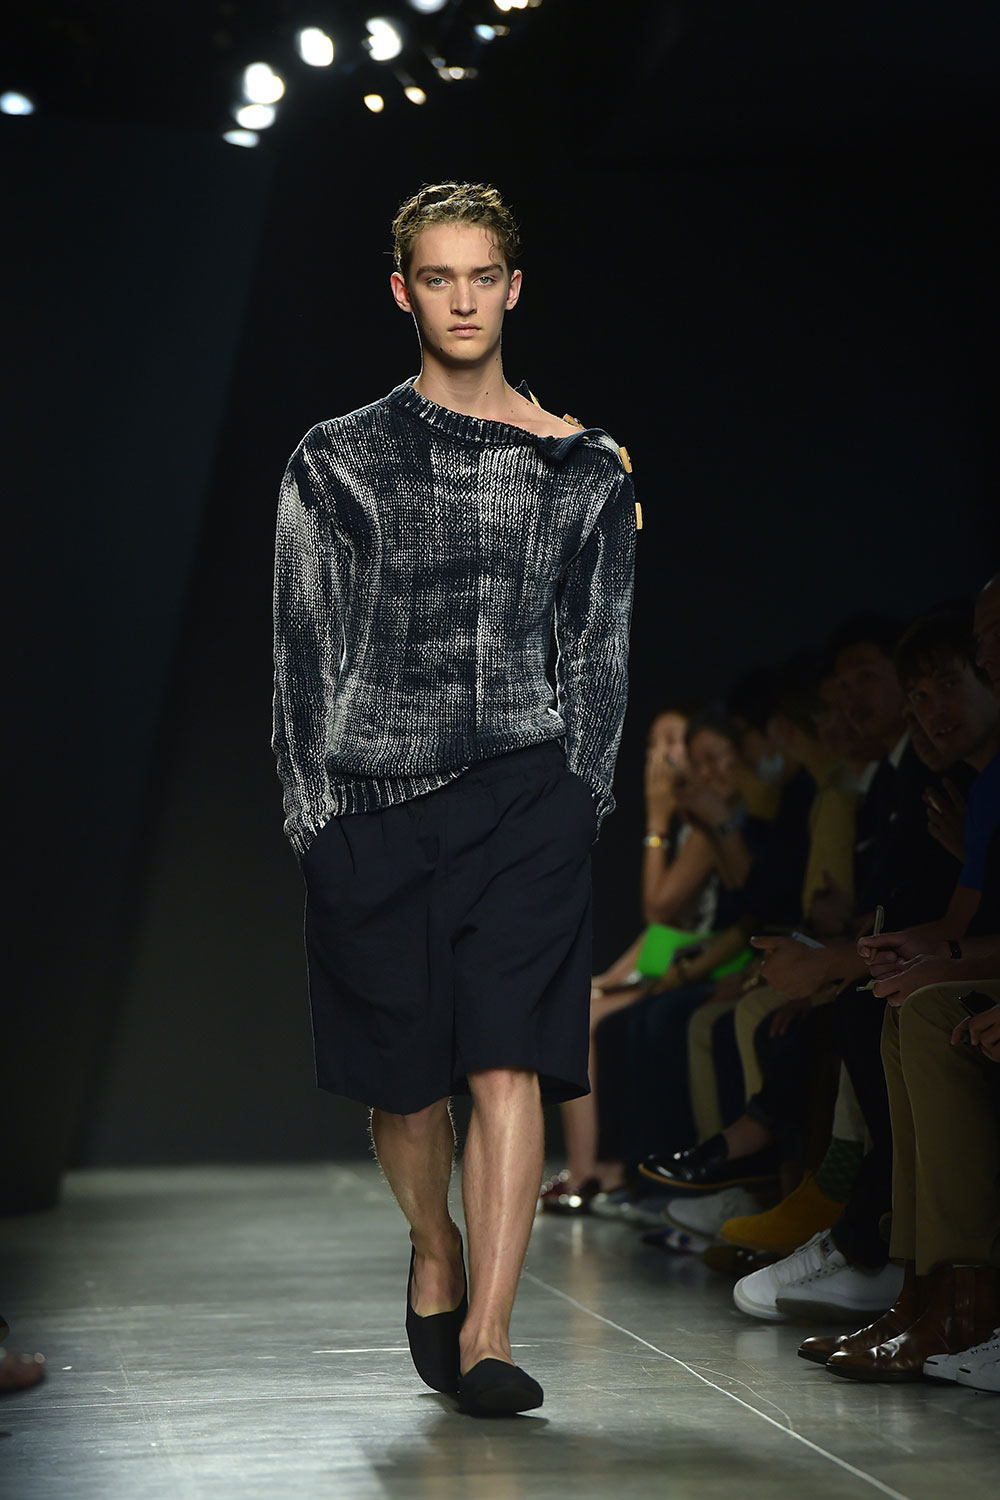 Rafferty Law walked the runway for Bottega Veneta and DKNY in 2014. Photo / Getty Images